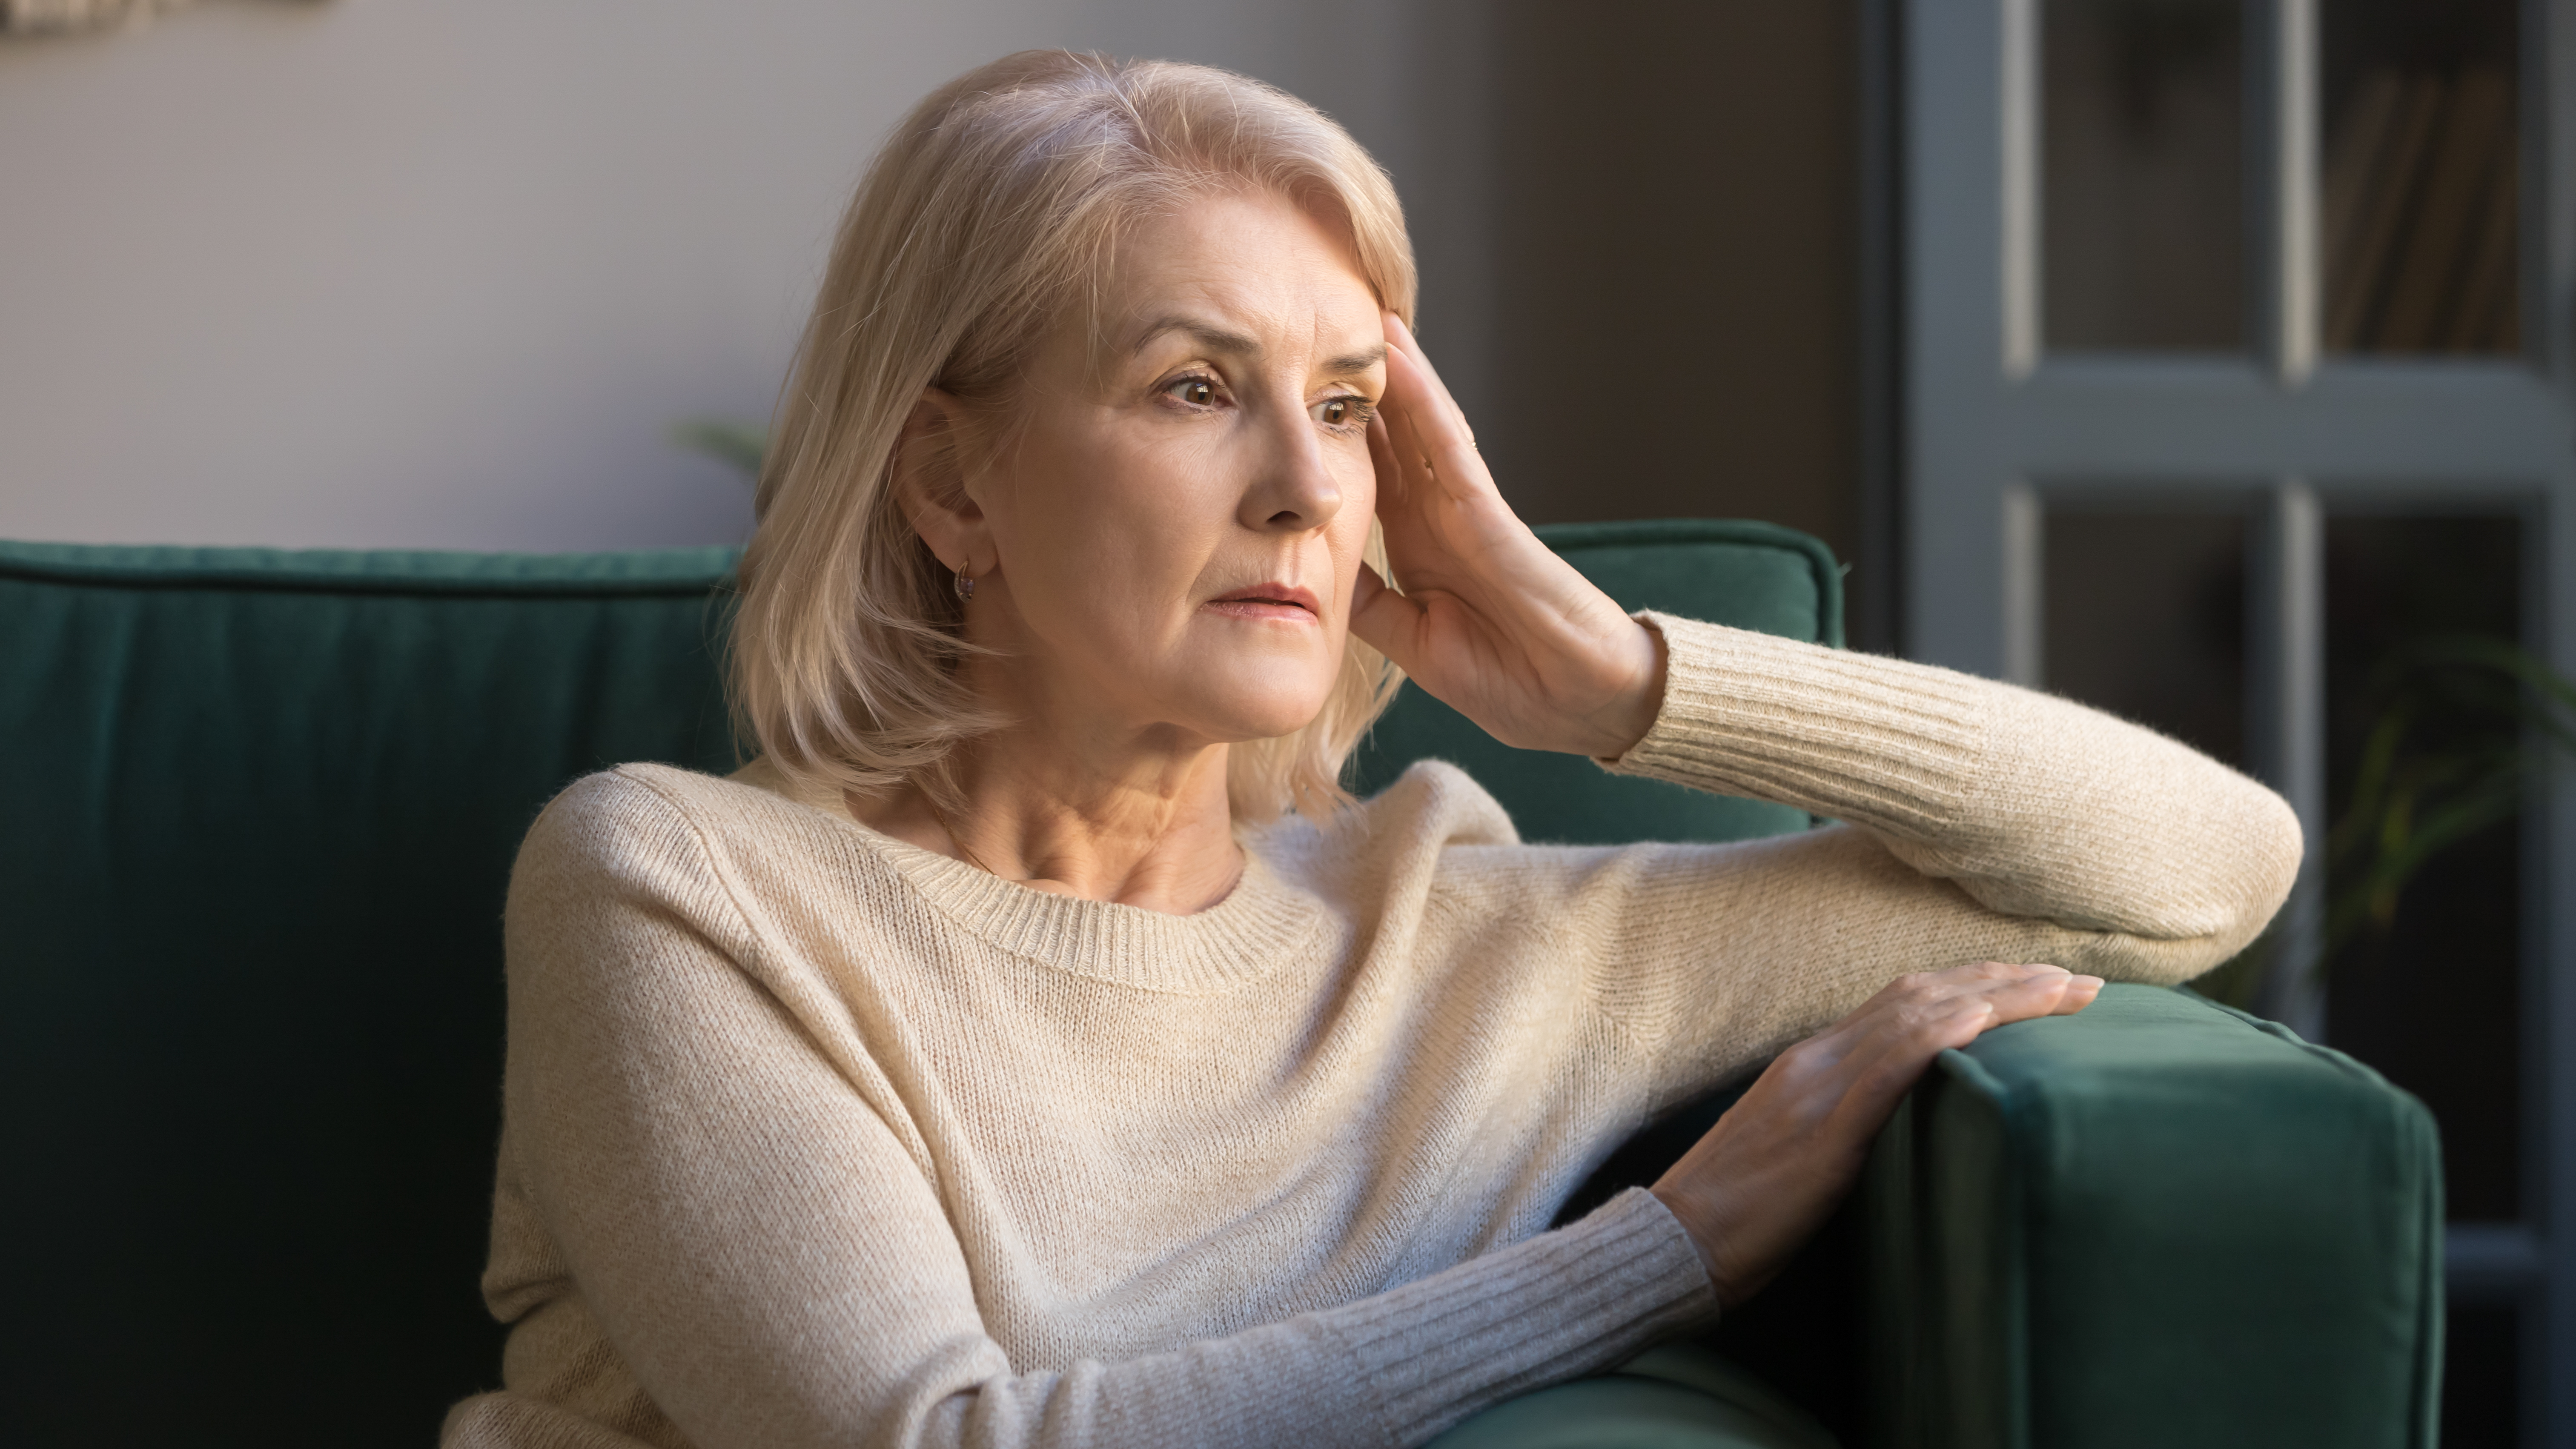 A depressed senior woman sitting on a sofa | Source: Shutterstock